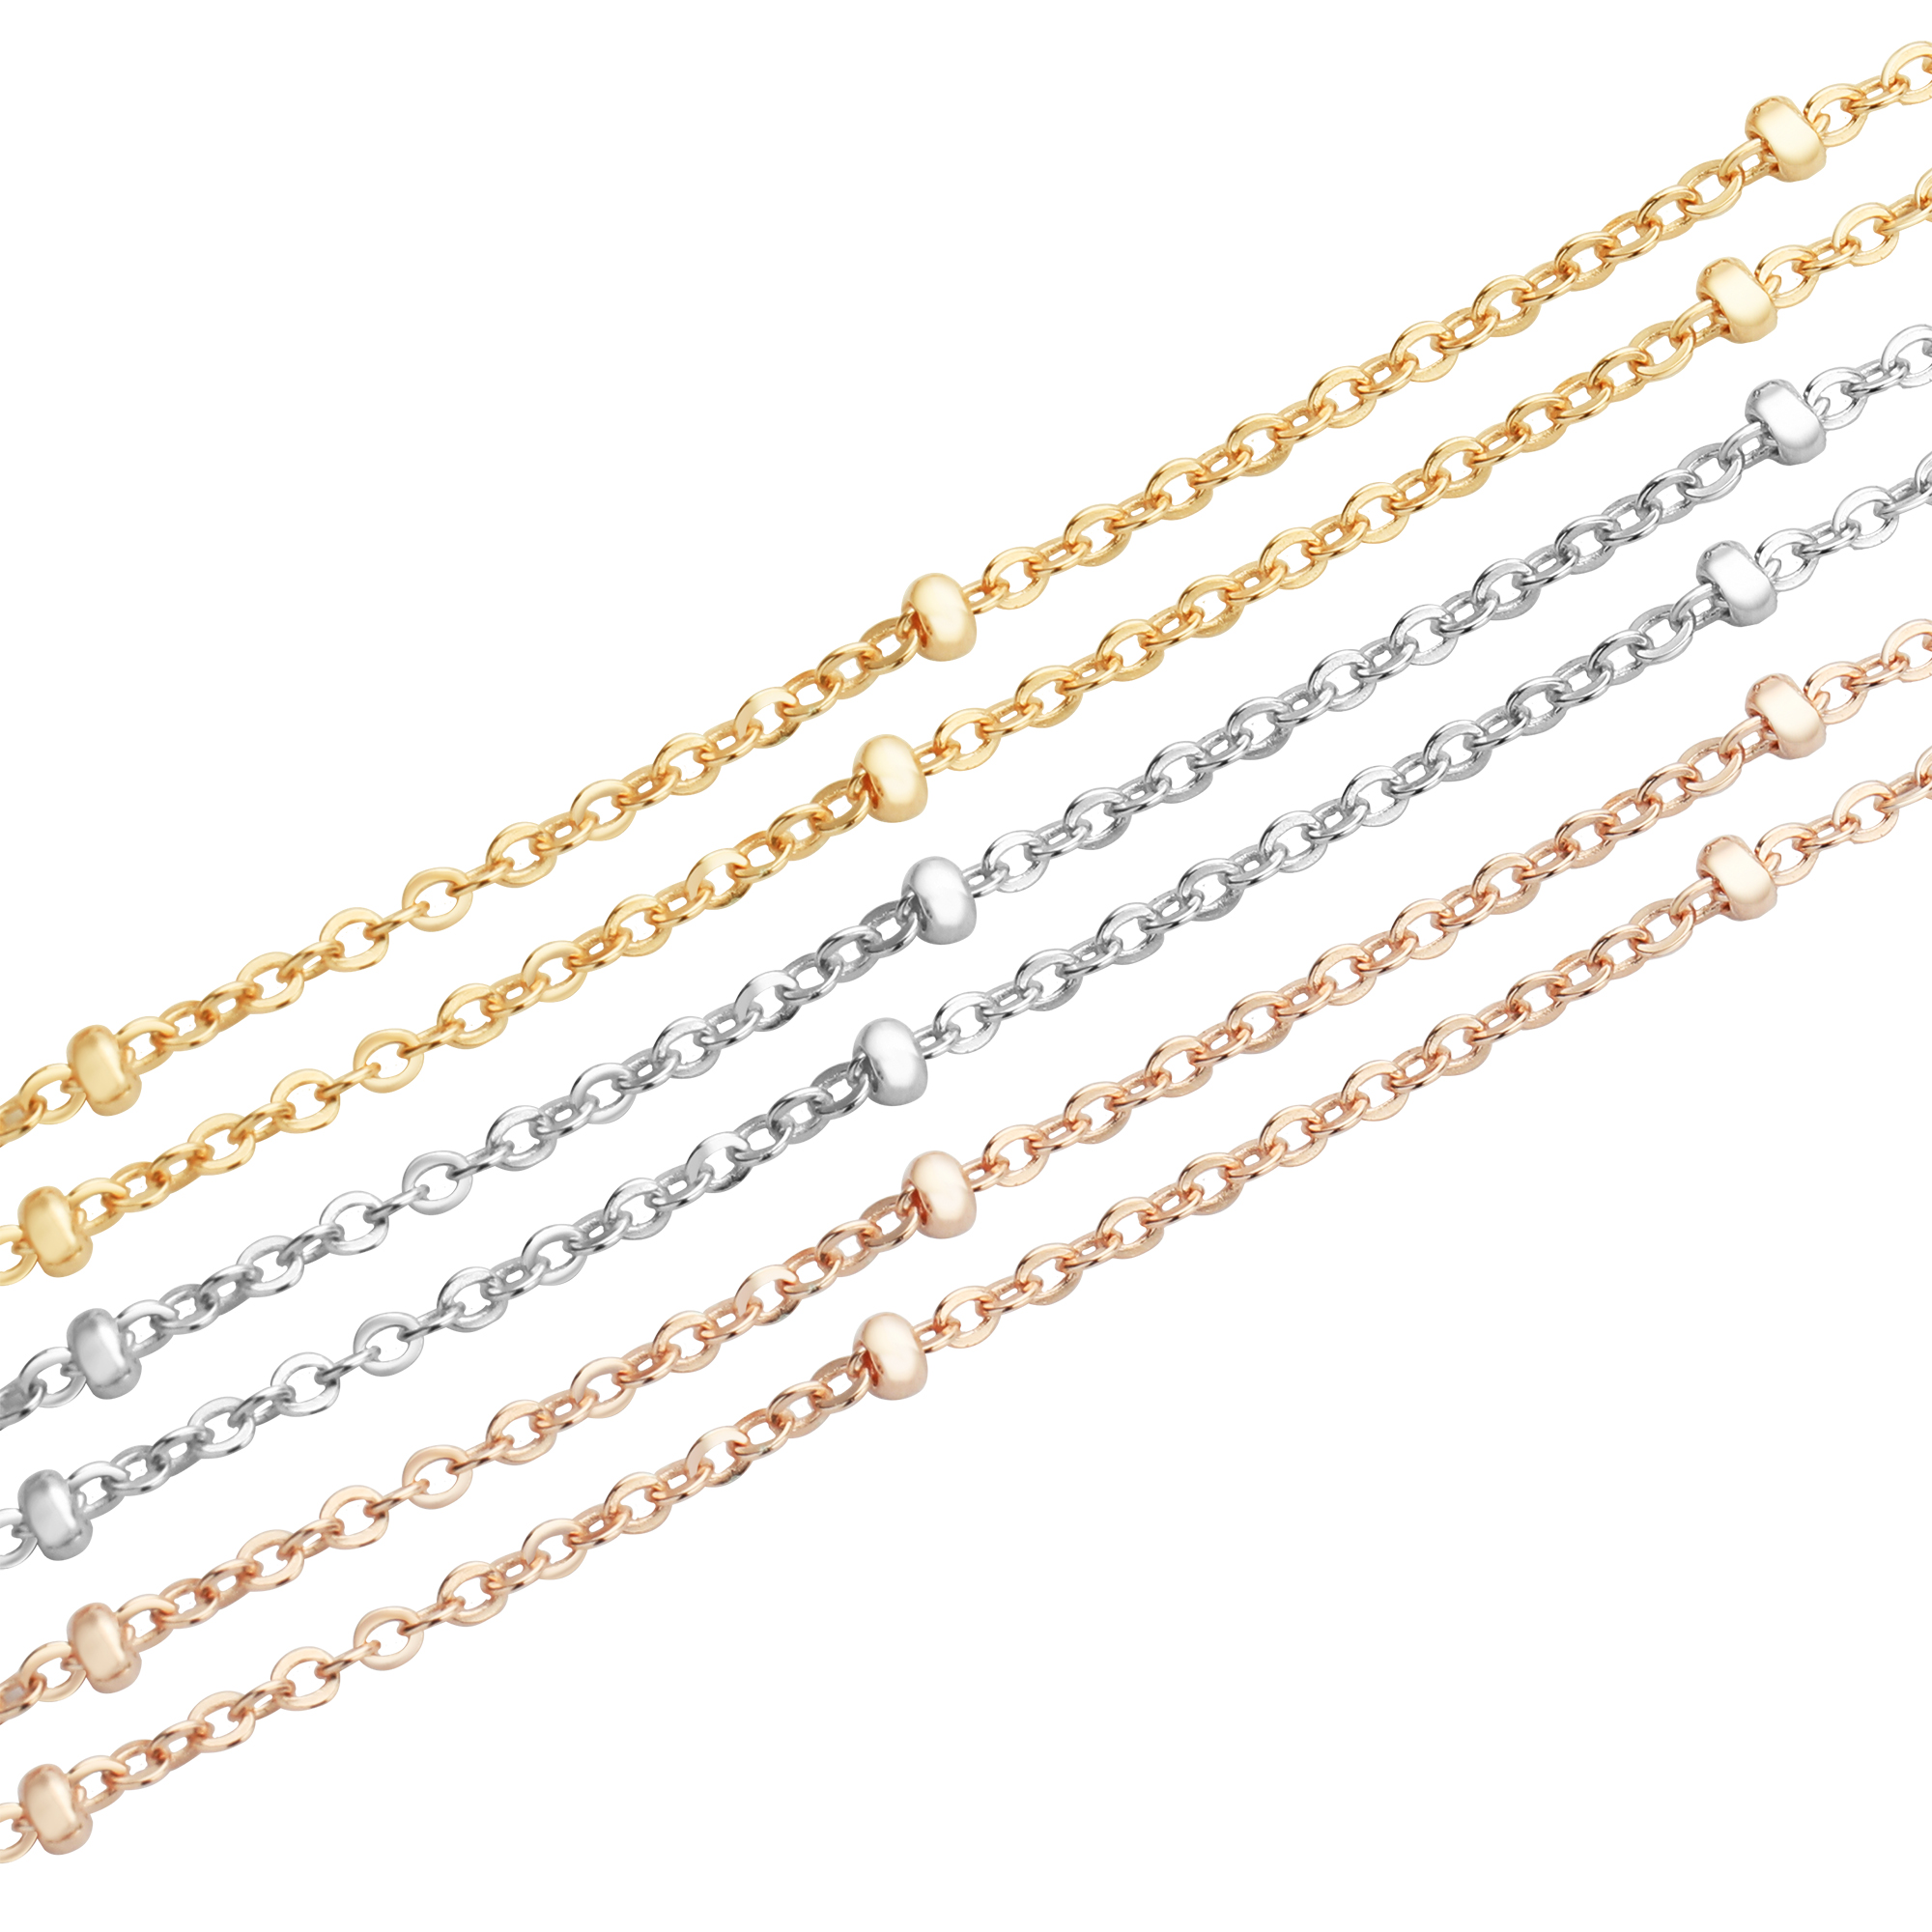 Cable 2MM Beads Chain Necklace,Solid 925 Solid Sterling Silver Rose Gold Plated Necklace Chain,Simple O Chain 16Inches with 2 Inch Extension Chain 1320029 - Click Image to Close